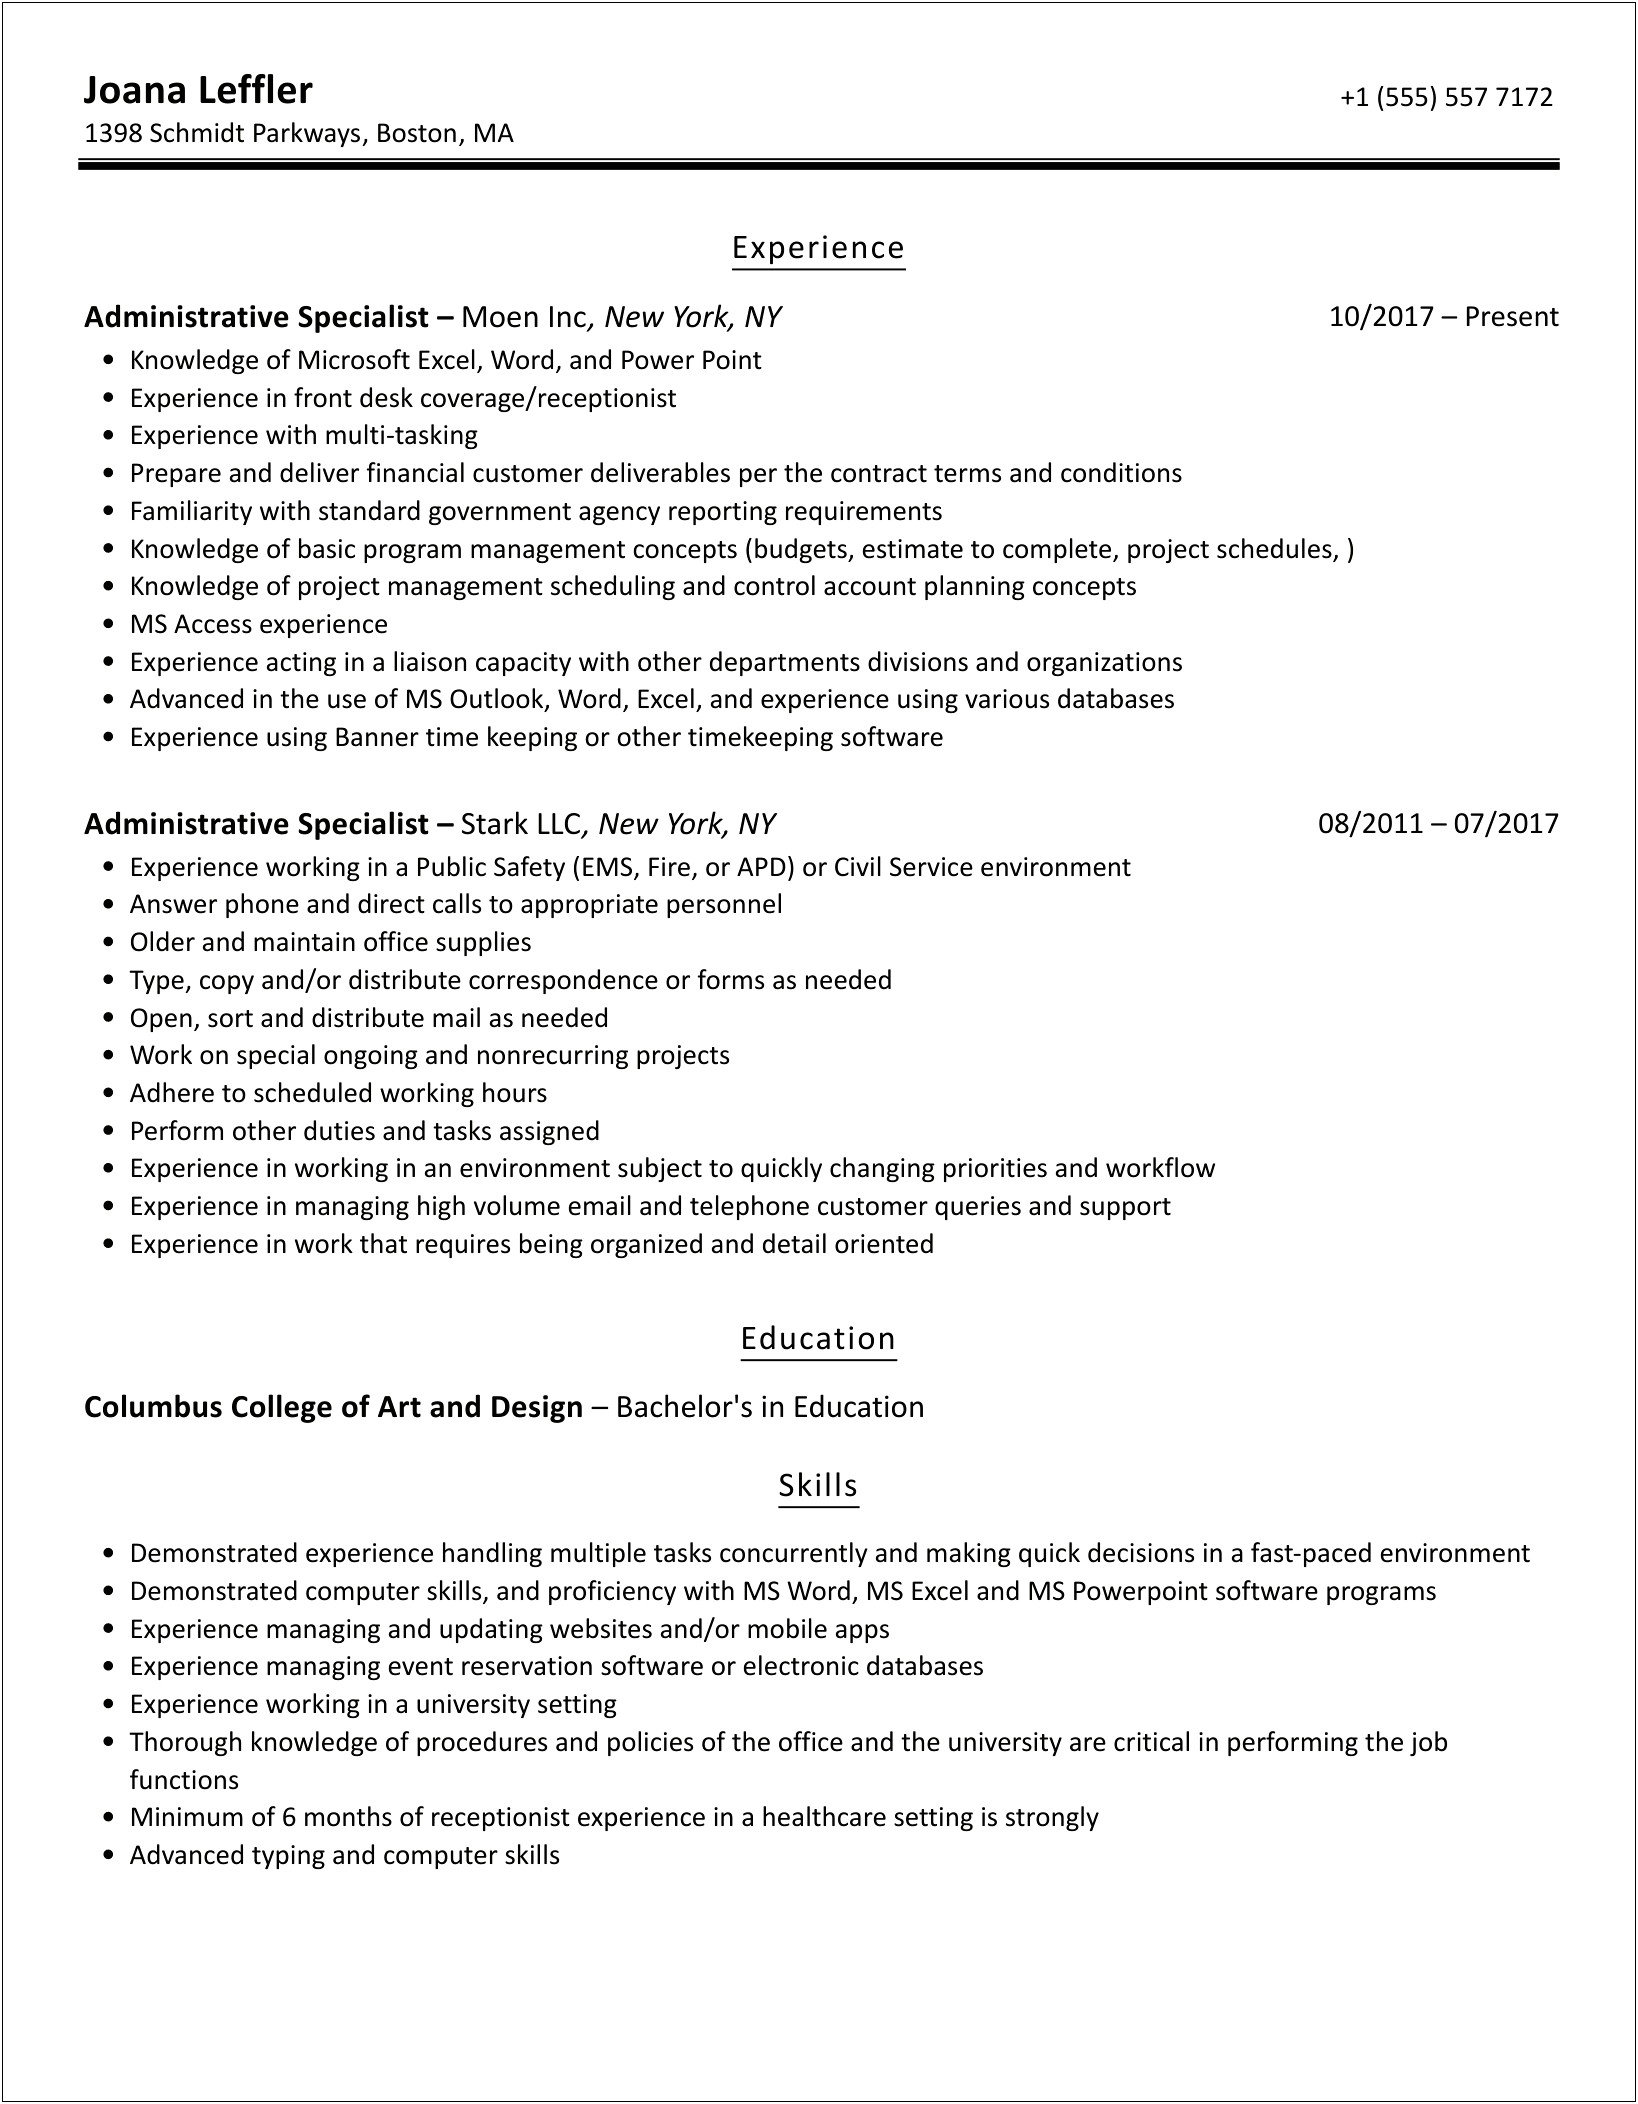 Example Federal Resume For Administrative Specialist